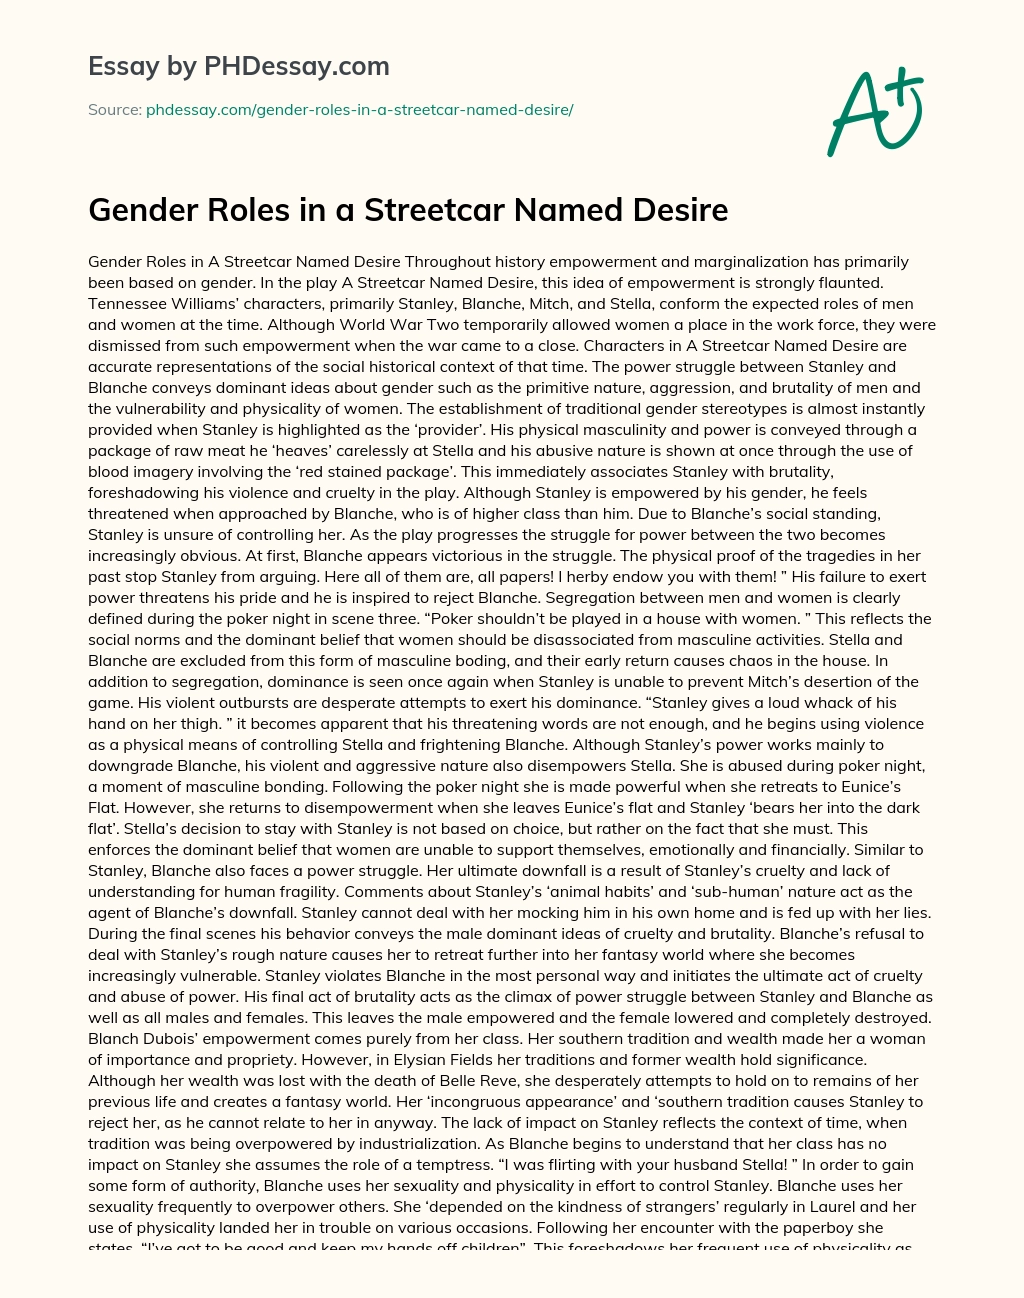 Gender Roles in a Streetcar Named Desire essay